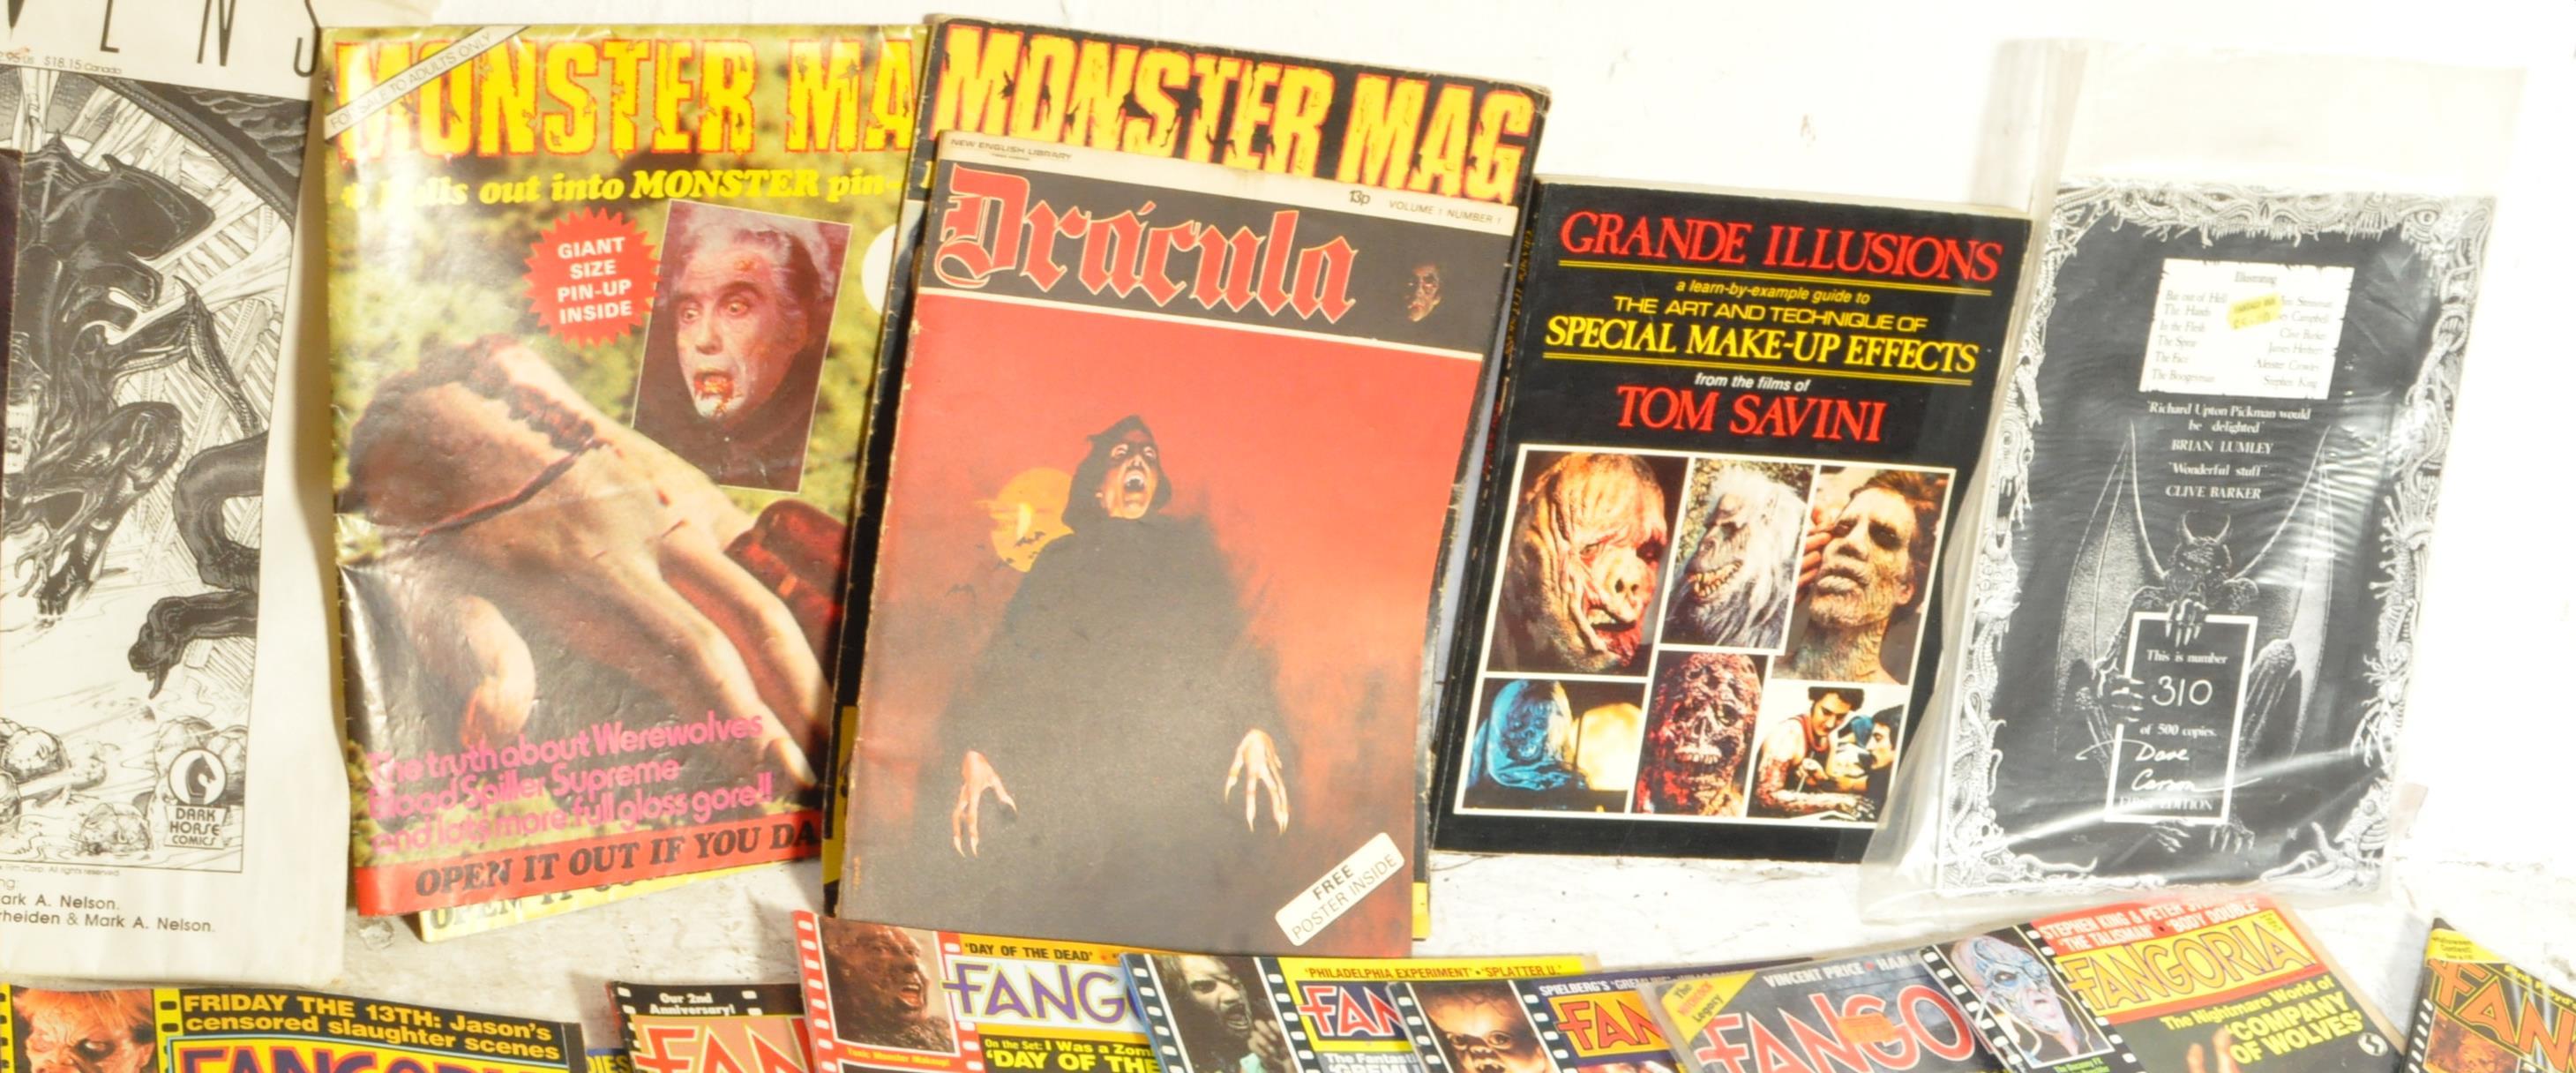 HORROR - COLLECTION OF VINTAGE FANGORIA COMIC BOOKS / MAGAZINES - Image 3 of 7